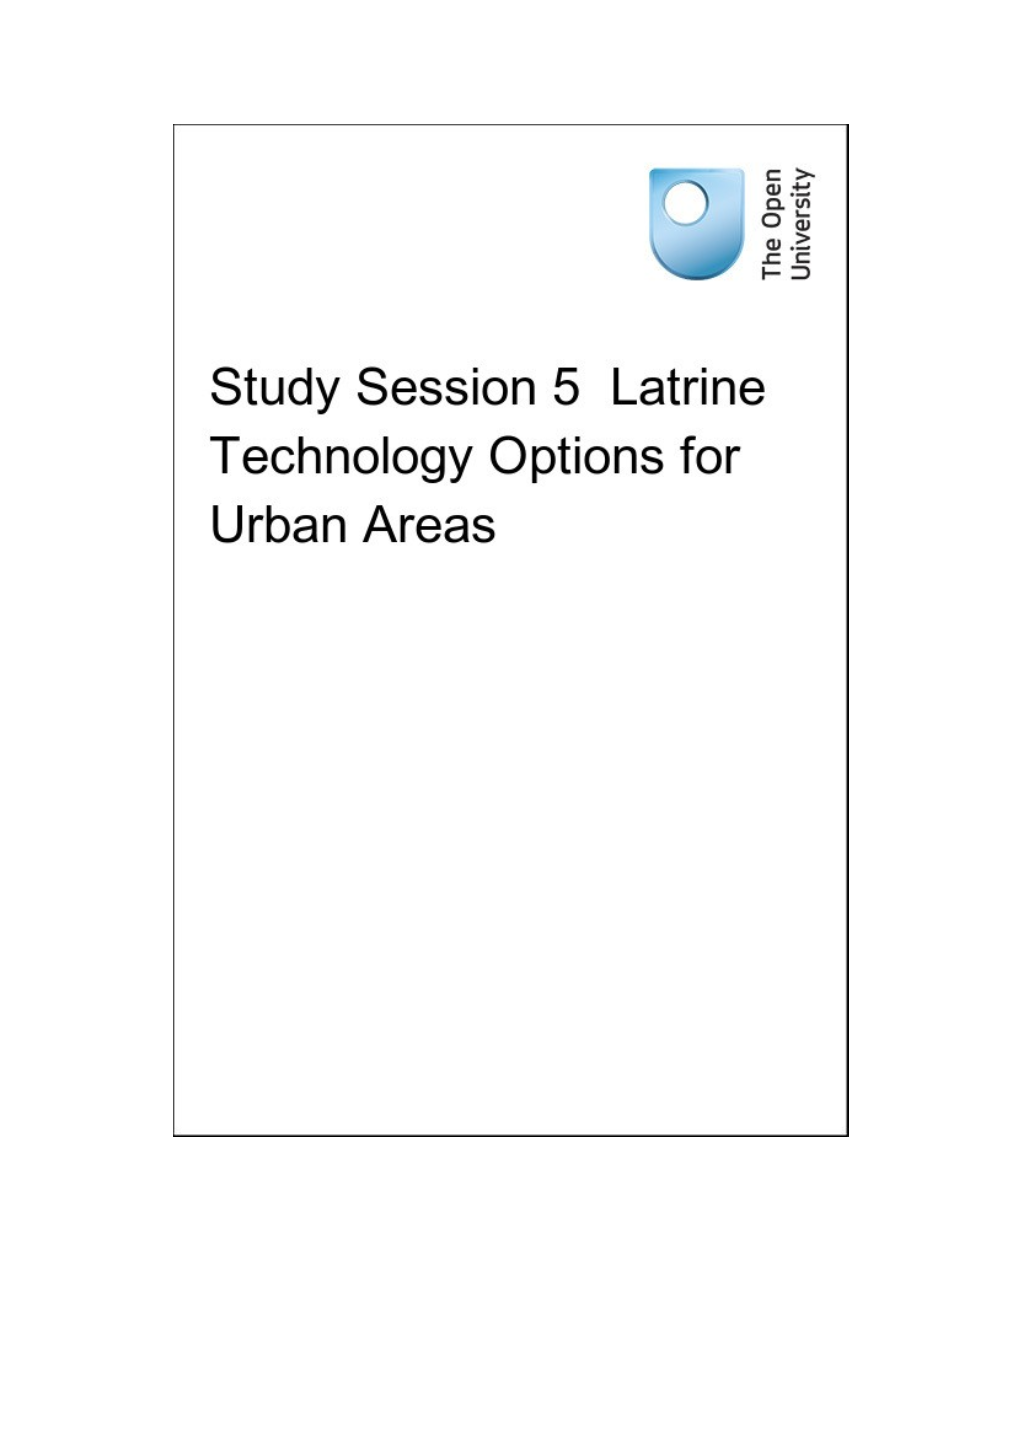 Study Session 5 Latrine Technology Options for Urban Areas